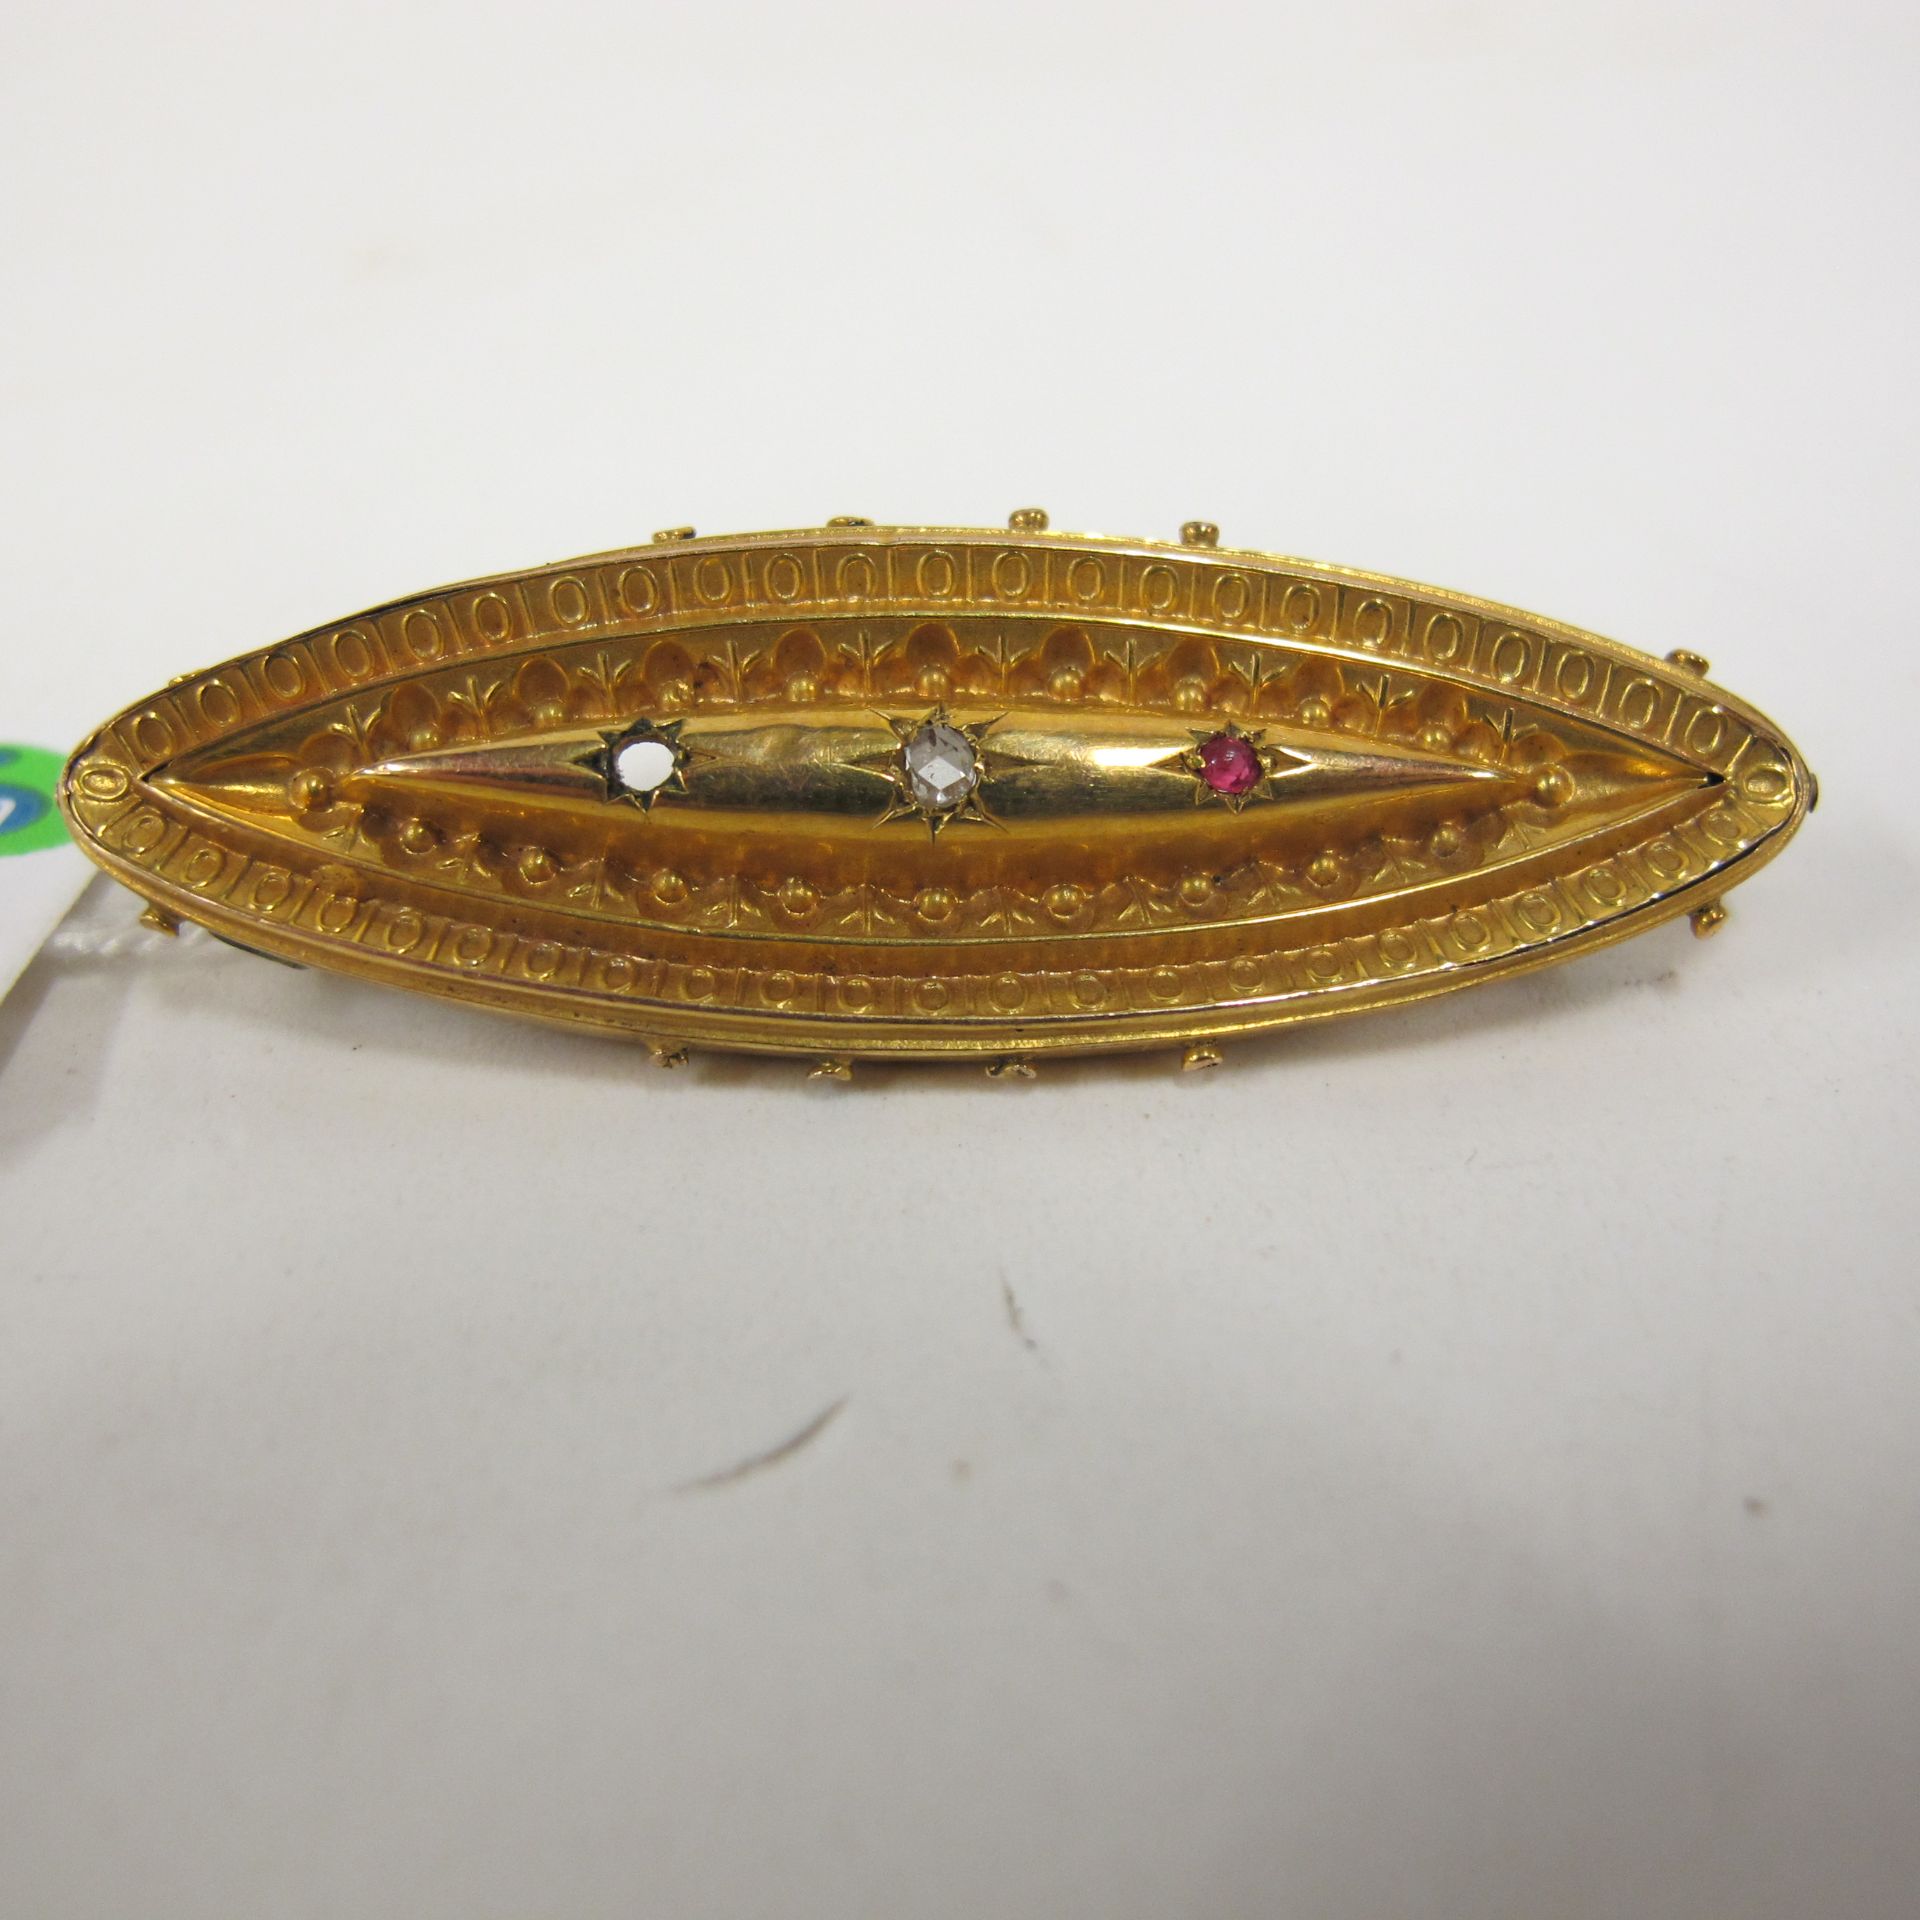 An oval gold brooch set with incomplete set of precious stones, together with another double bar